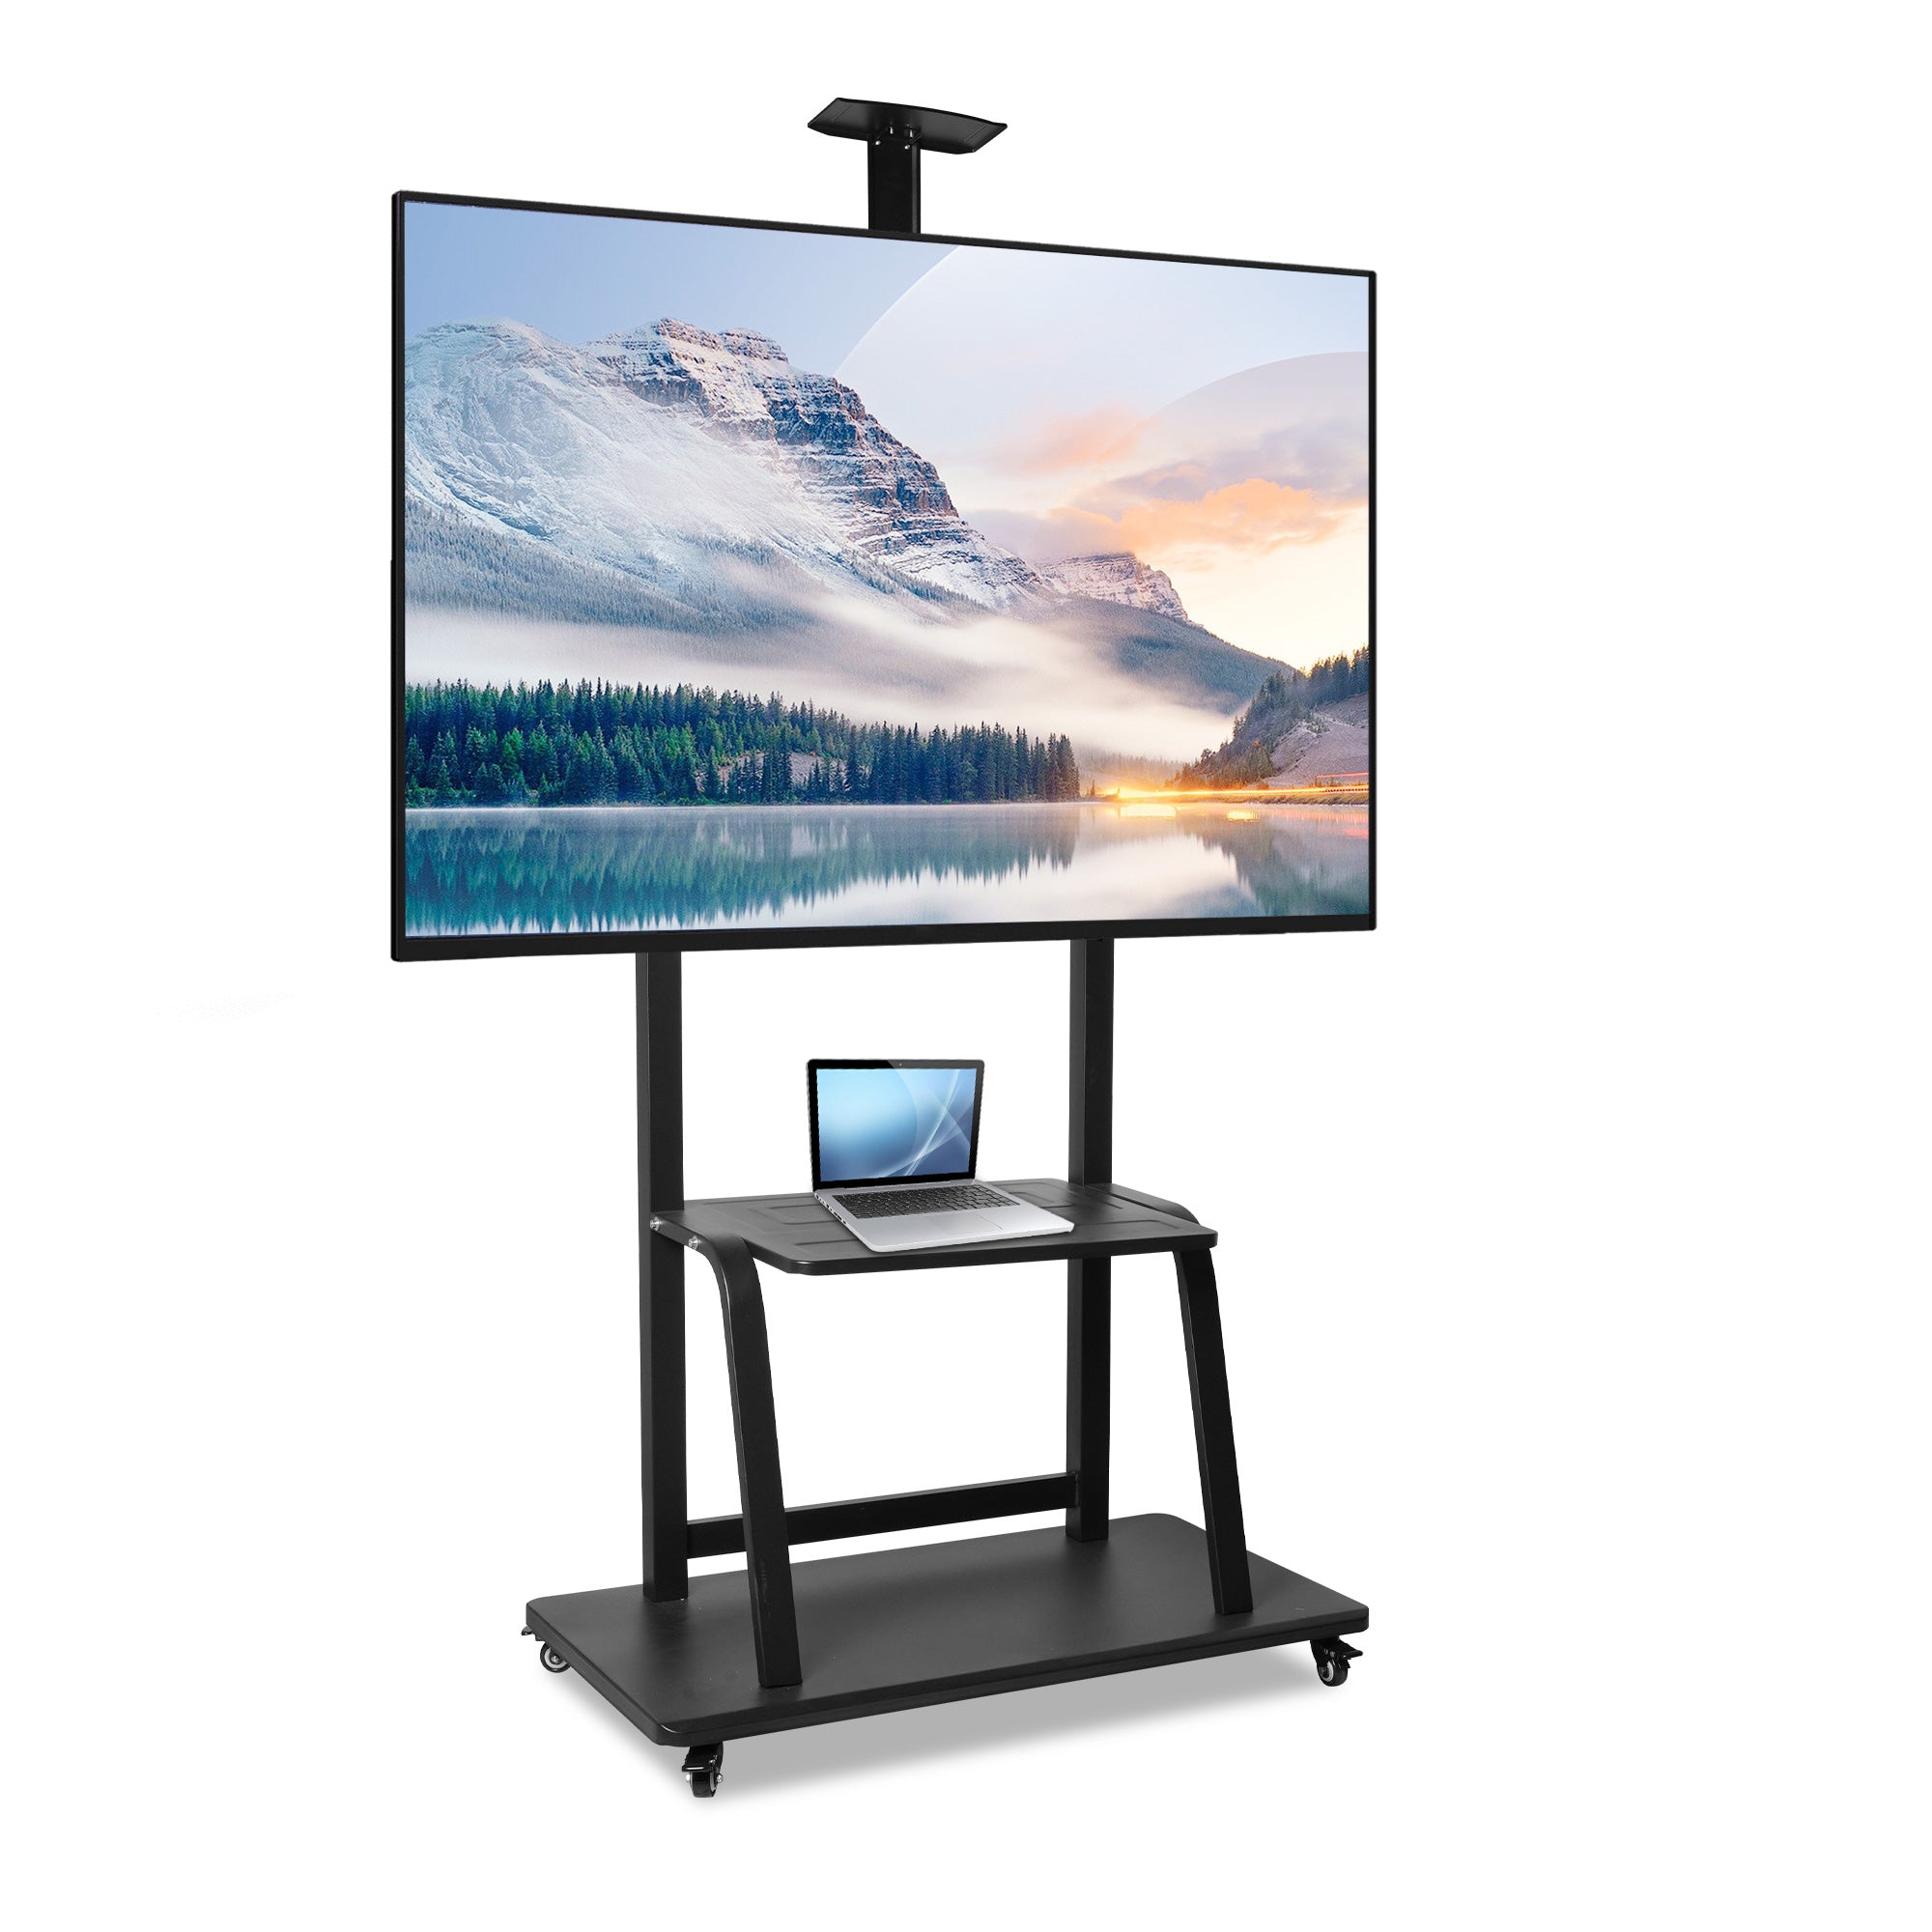 Mobile TV Stand with Wheels for 42-100 Inch Flat Screen TVs - Portable Tall TV Cart with Adjustable Height, Camera Shelf, Holds Up to 330lbs, Max VESA 900x600mm